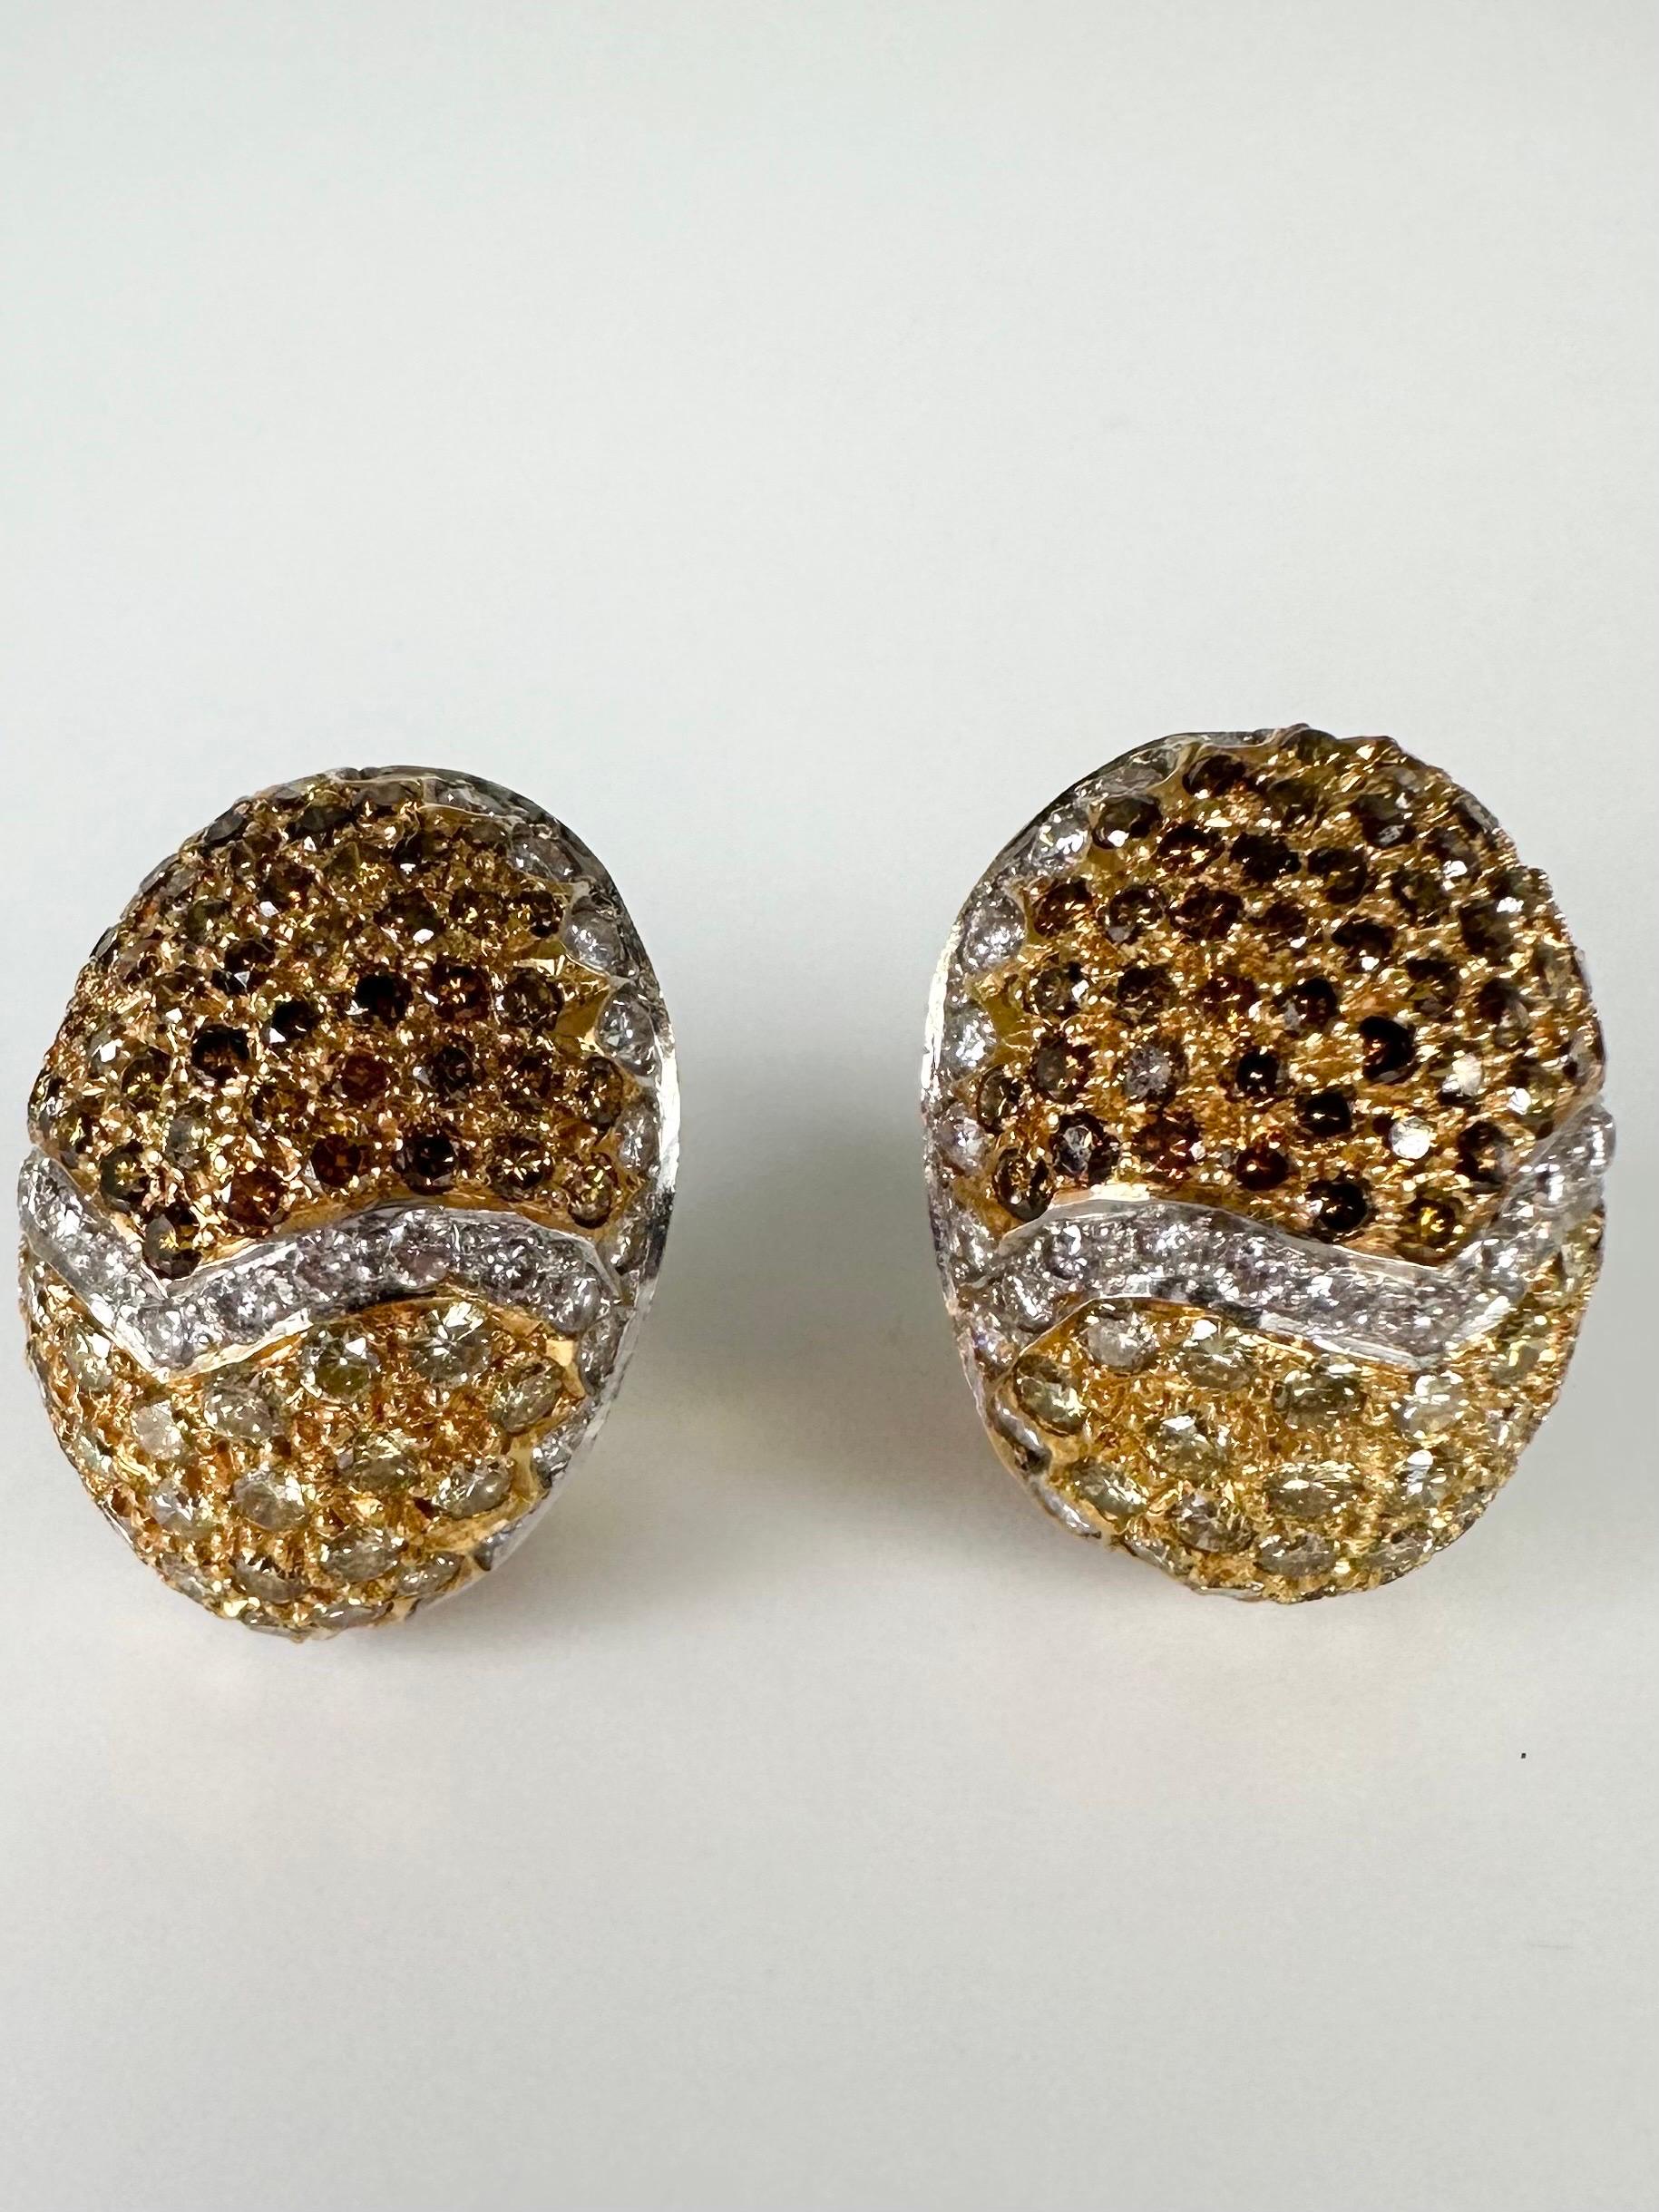 Easter egg diamond earrings made wih fancy brown and fancy yellow diamonds in 18KT yellow gold, these earrings look amazing on ears and are the right size!

GOLD: 18KT gold
NATURAL DIAMOND(S)
Clarity/Color: VS/F
Carat:3.74ct
Cut:Round